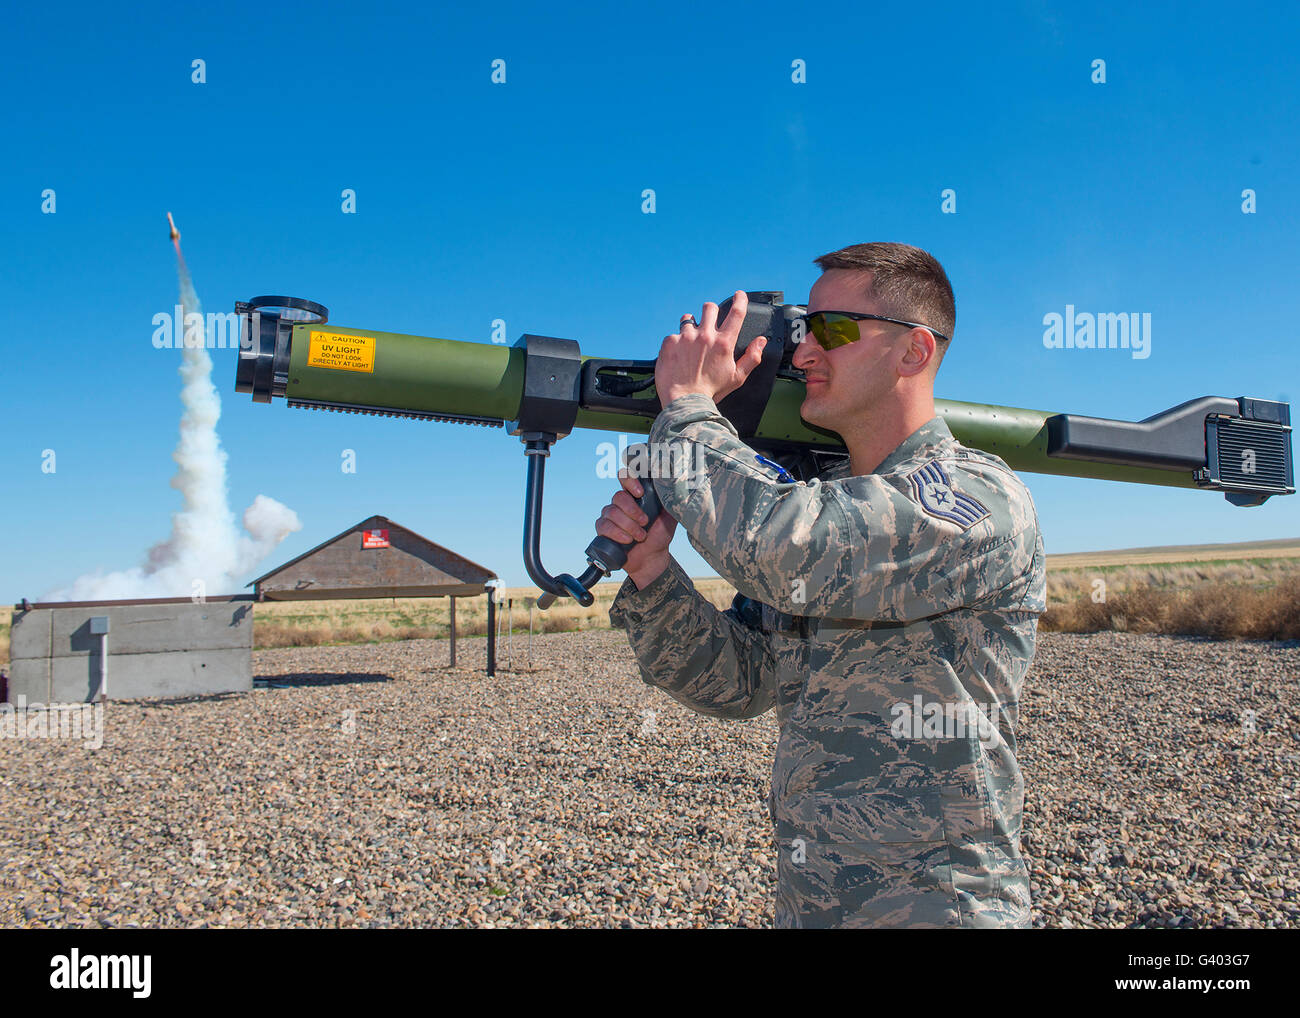 U.S. Soldier fires a man-portable aircraft survivability trainer (MAST). Stock Photo